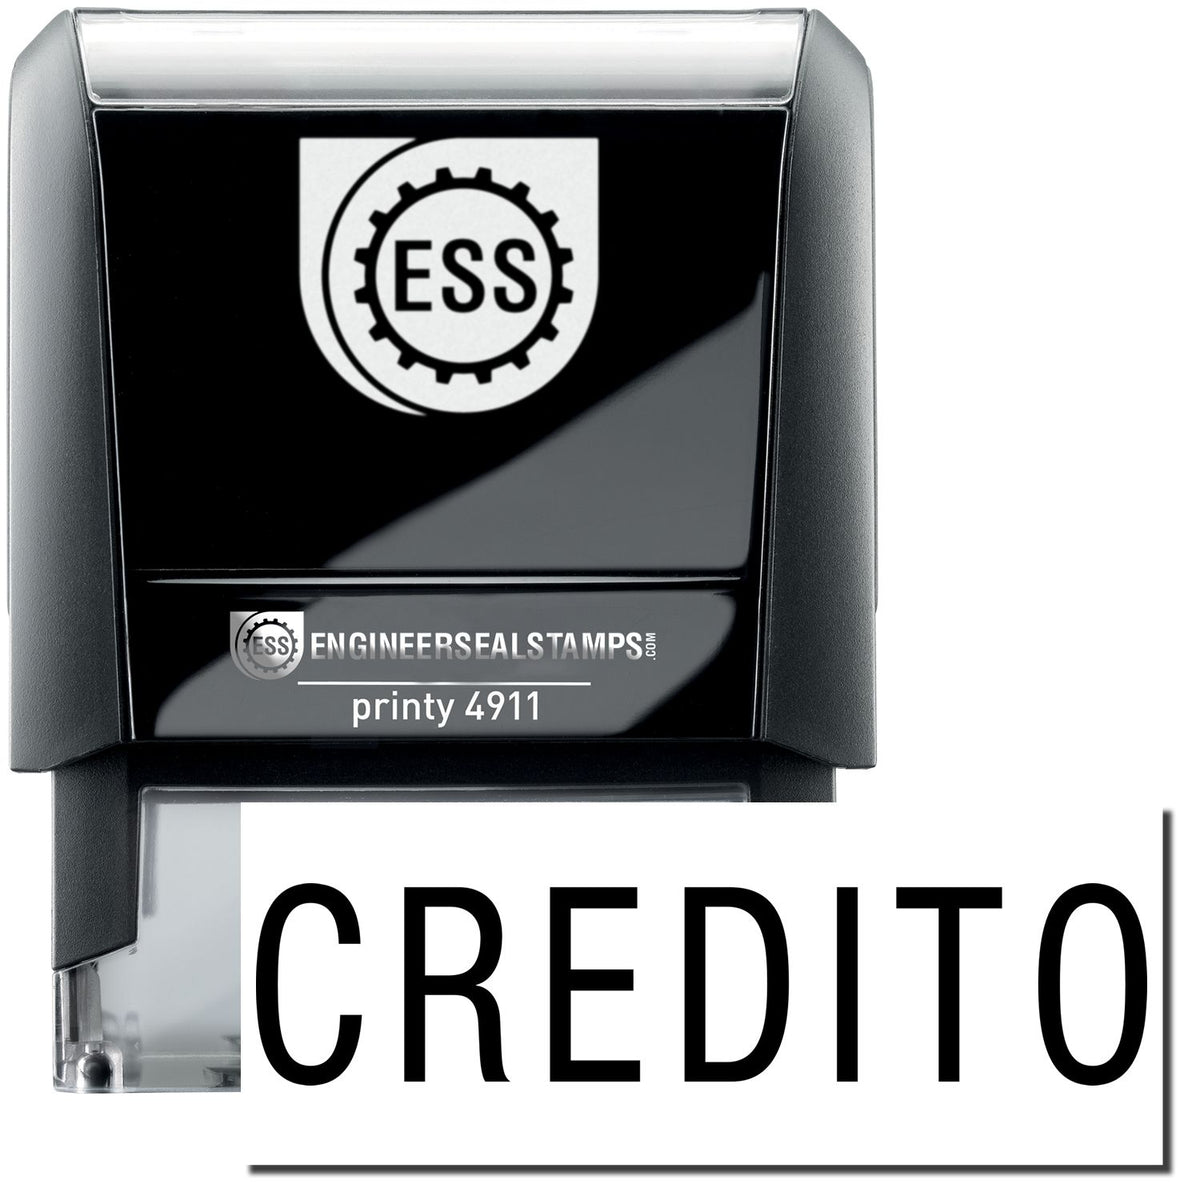 A self-inking stamp with a stamped image showing how the text &quot;CREDITO&quot; is displayed after stamping.